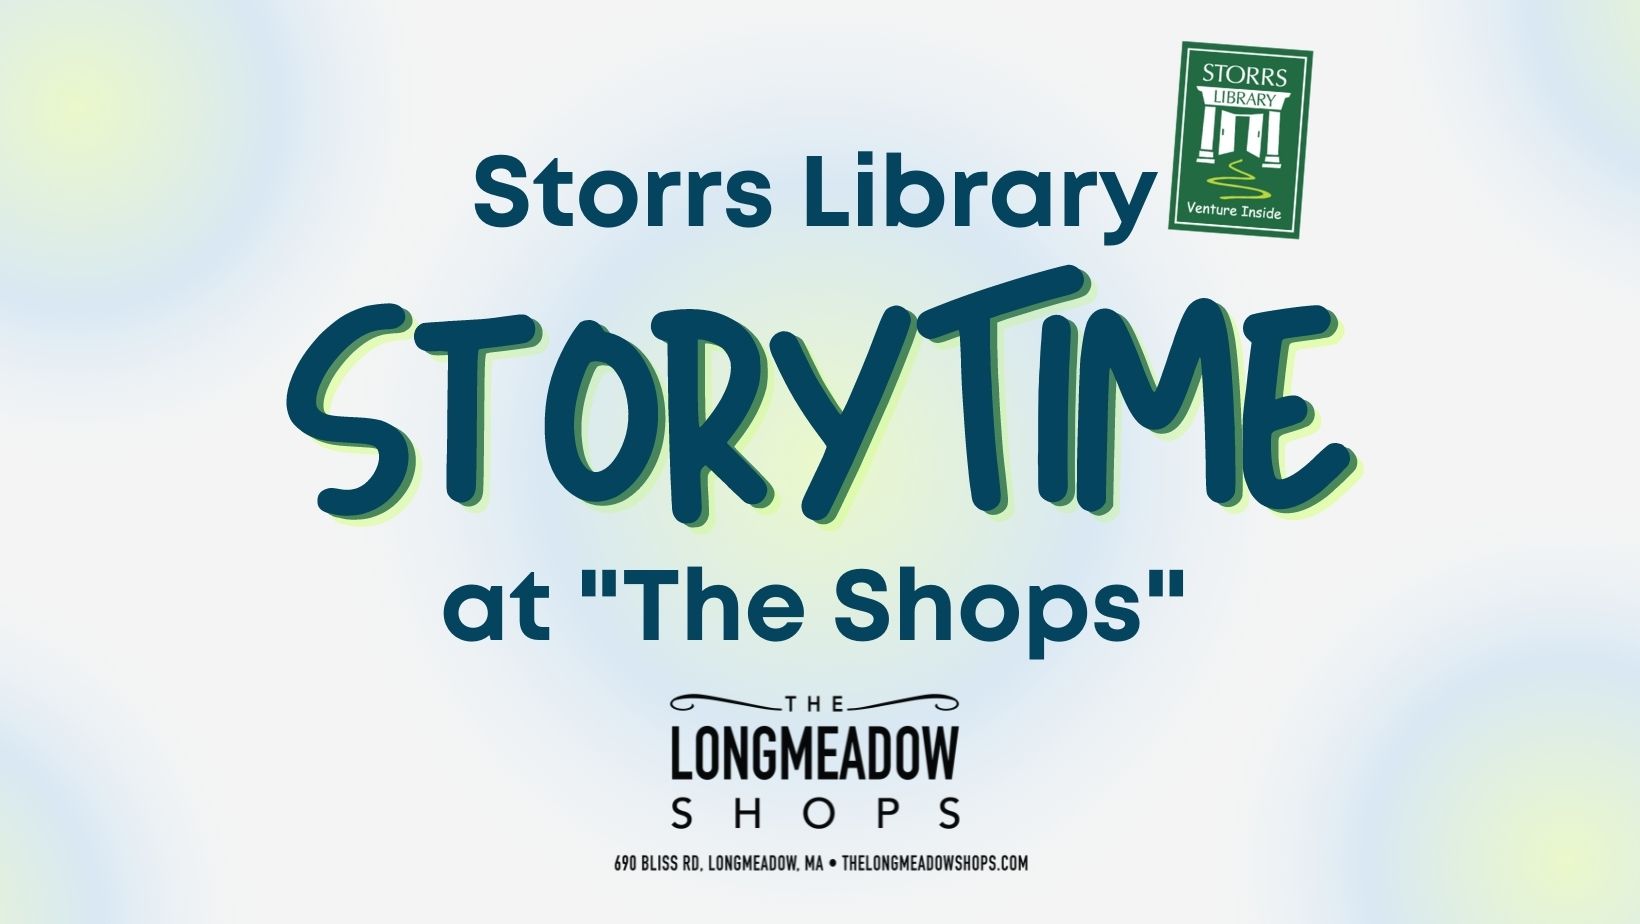 Storytime at The Shops